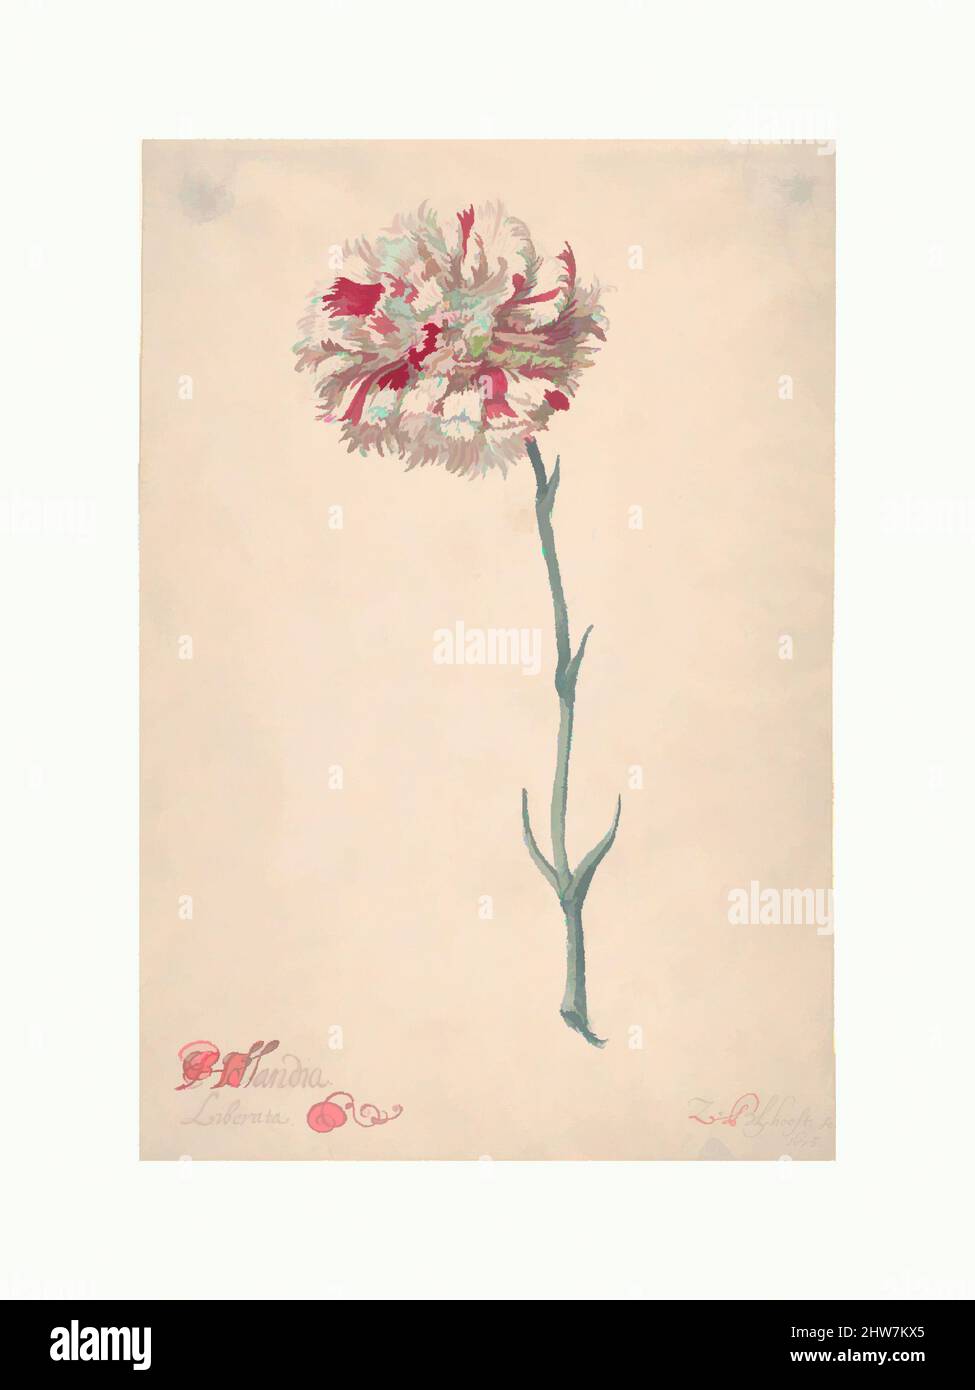 Art inspired by A Carnation ('Hollandia Liberata'), 1675, Watercolor and gouache, Sheet: 11 1/4 x 7 5/8 in. (28.5 x 19.4 cm), Drawings, Zacharias Blijhooft (Dutch, ca. 1630–1681 Middelburg, Classic works modernized by Artotop with a splash of modernity. Shapes, color and value, eye-catching visual impact on art. Emotions through freedom of artworks in a contemporary way. A timeless message pursuing a wildly creative new direction. Artists turning to the digital medium and creating the Artotop NFT Stock Photo